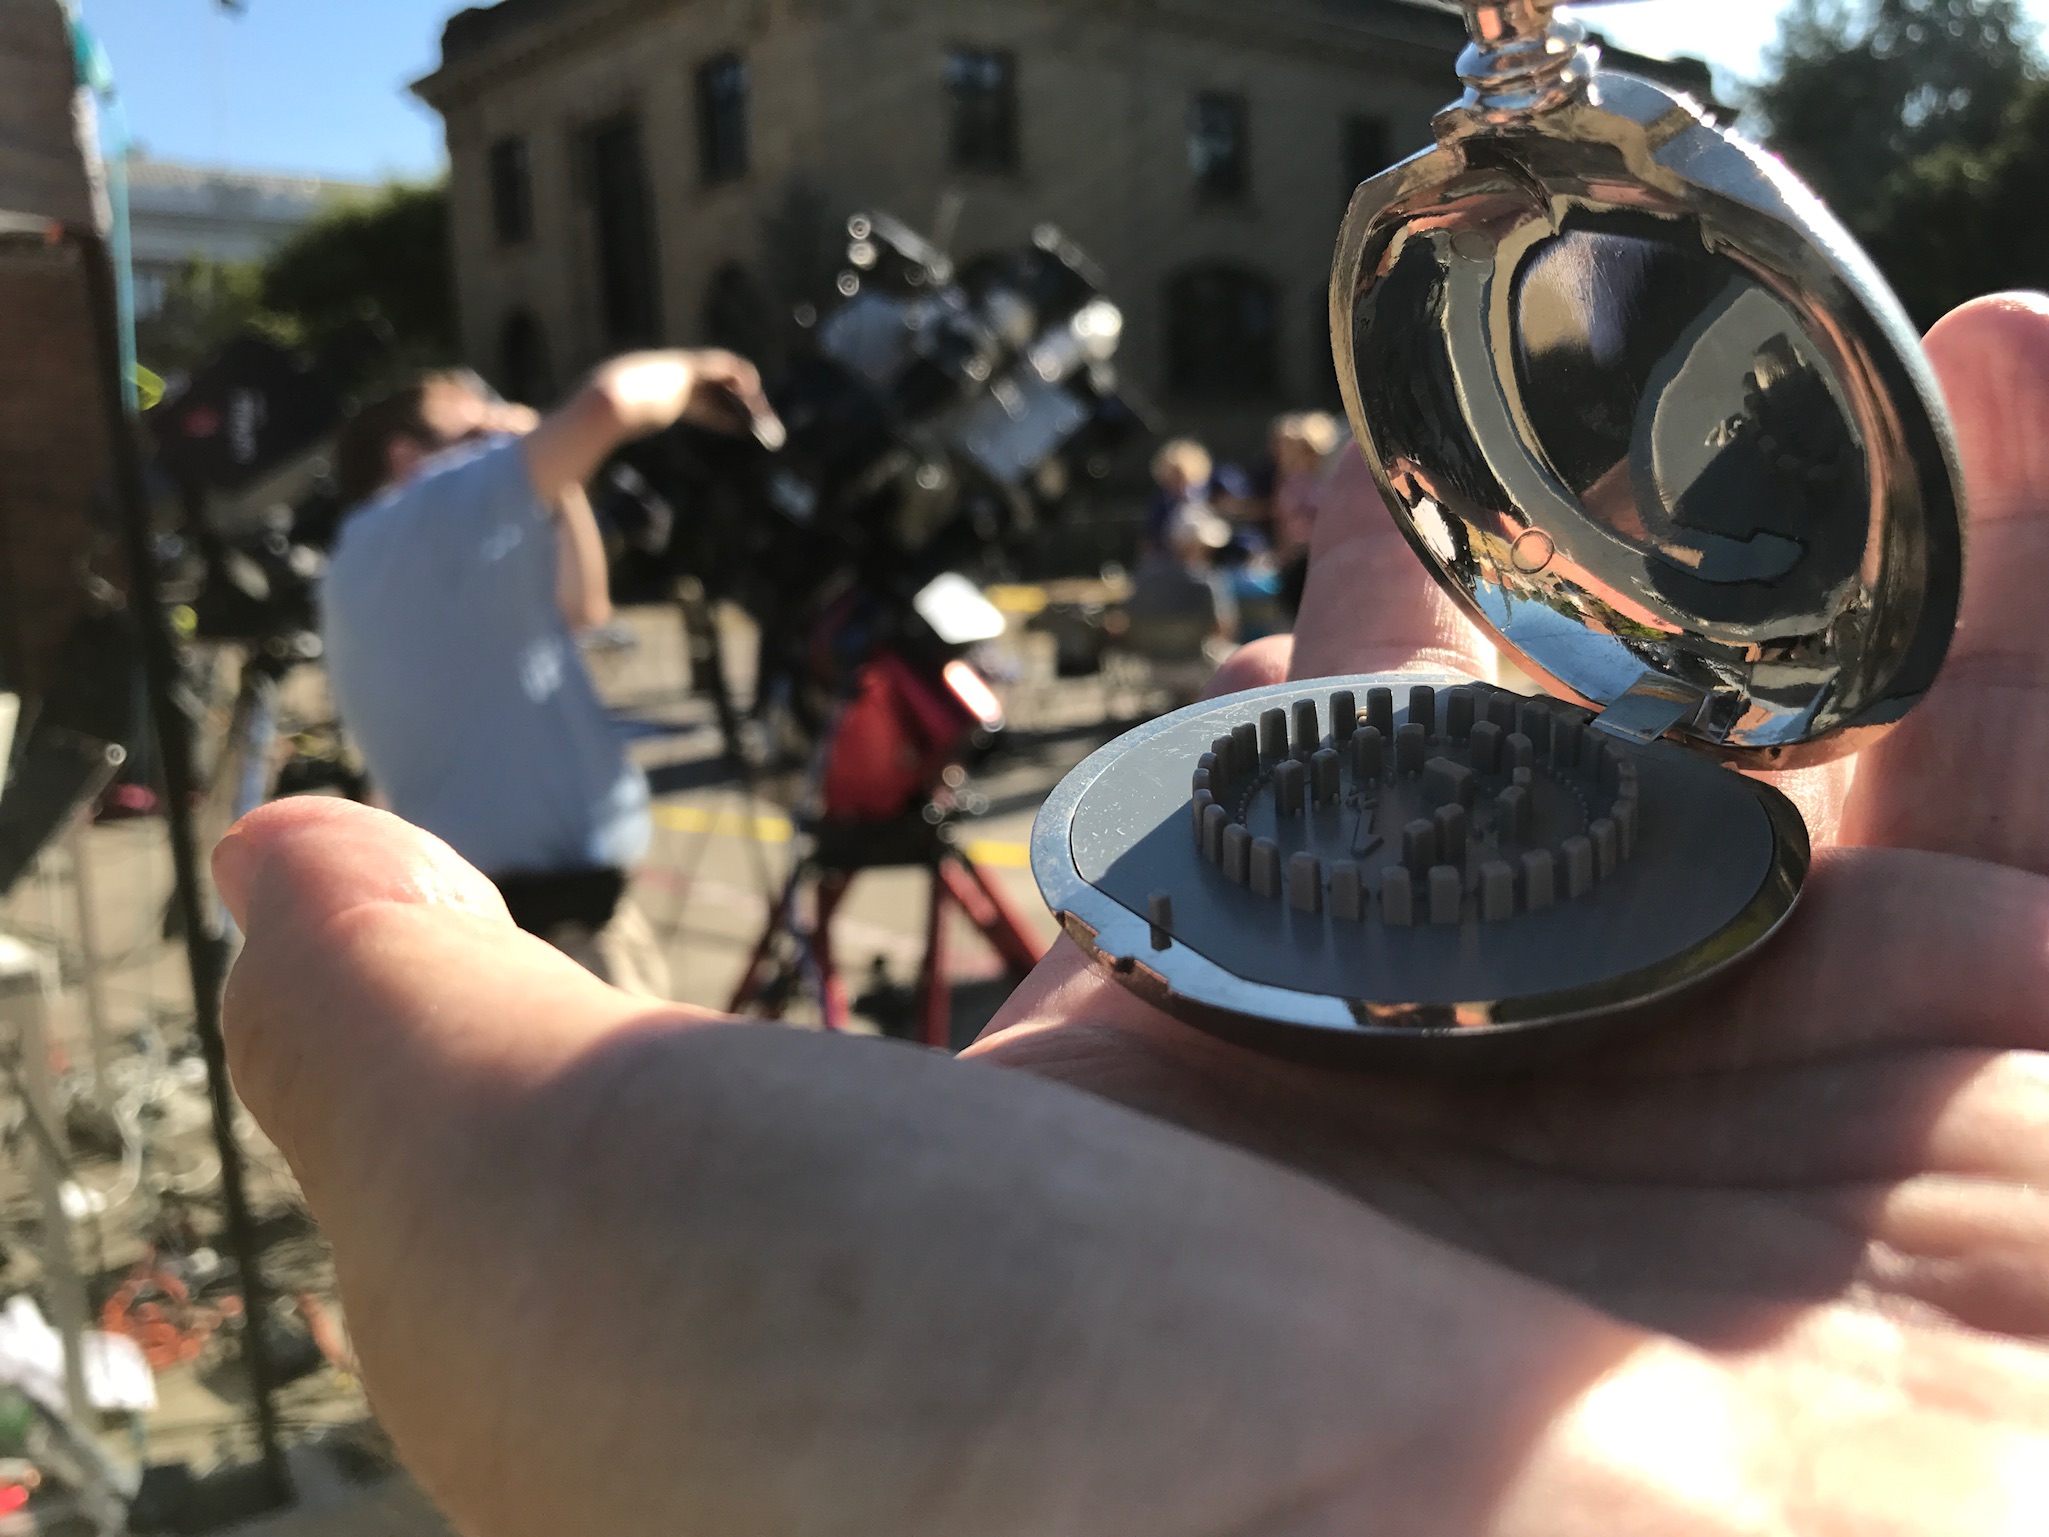 After The Stonehenge Watch was named "the official eclipse predictor" by the American Journal of physics" for The Great American Eclipse it is shown with all the scientific instruments in Oregon